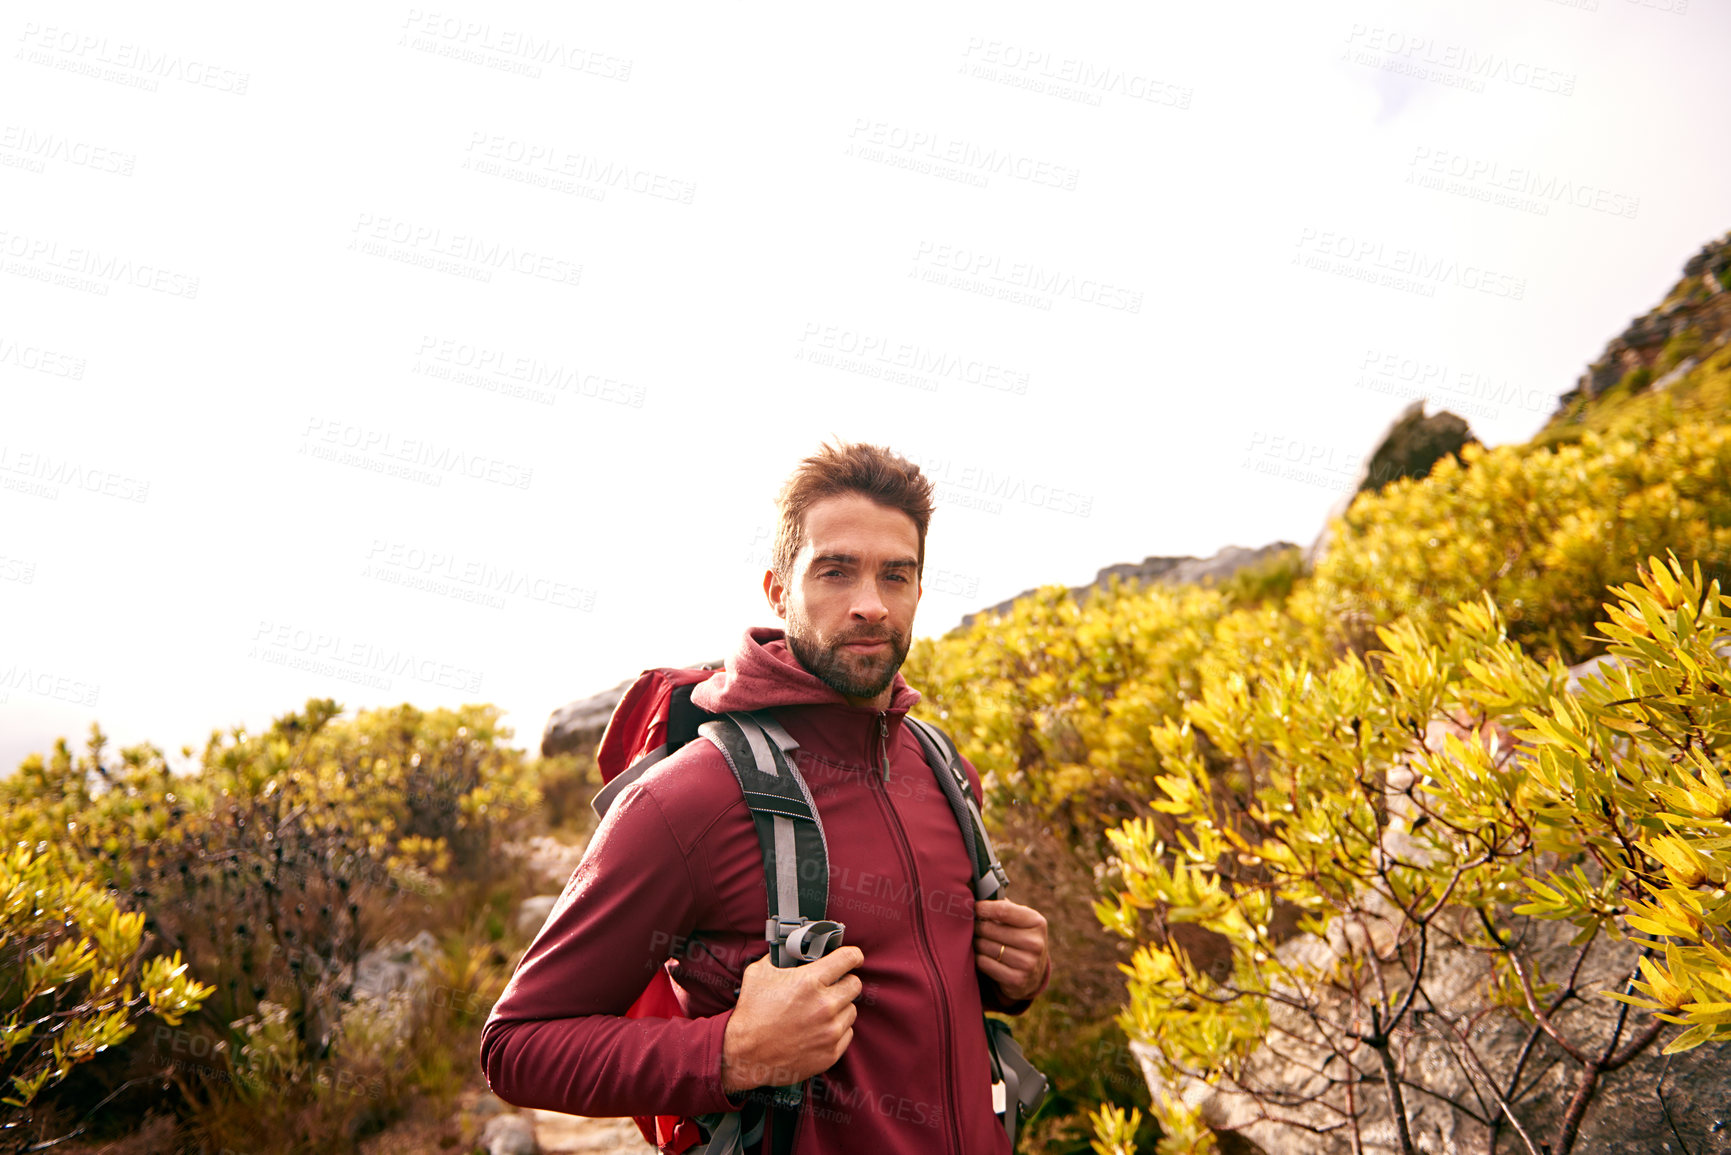 Buy stock photo Confidence, hiking and portrait of man on mountain, nature and forest for outdoor adventure. Male person, athlete and sport in environment for exercise, fitness and health with backpack by landscape